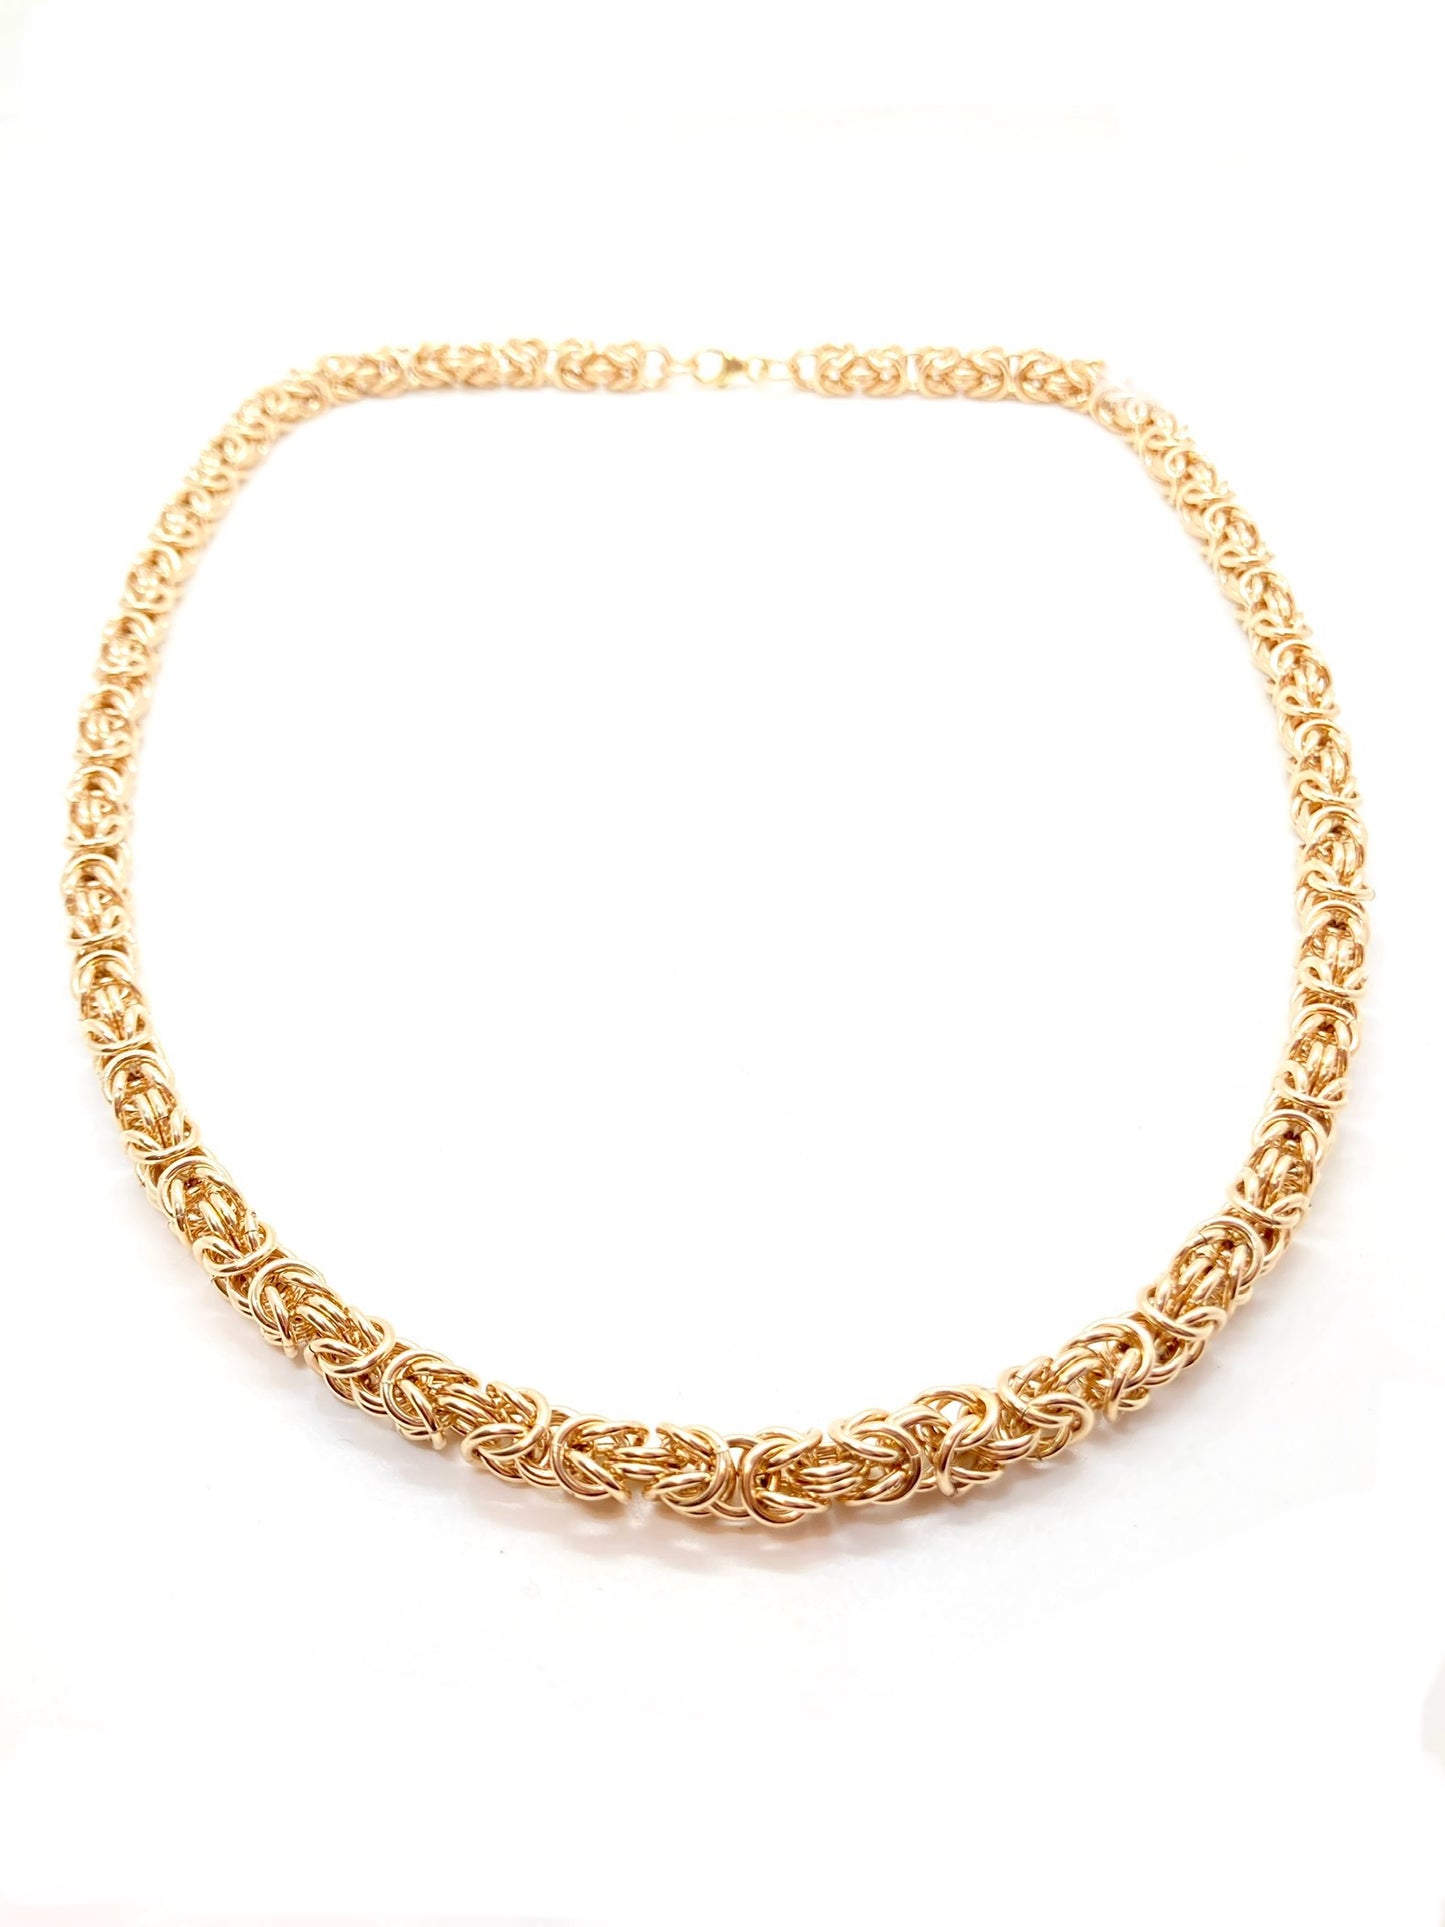 Byzantine Chainmaille Necklace in 14K Gold Fill